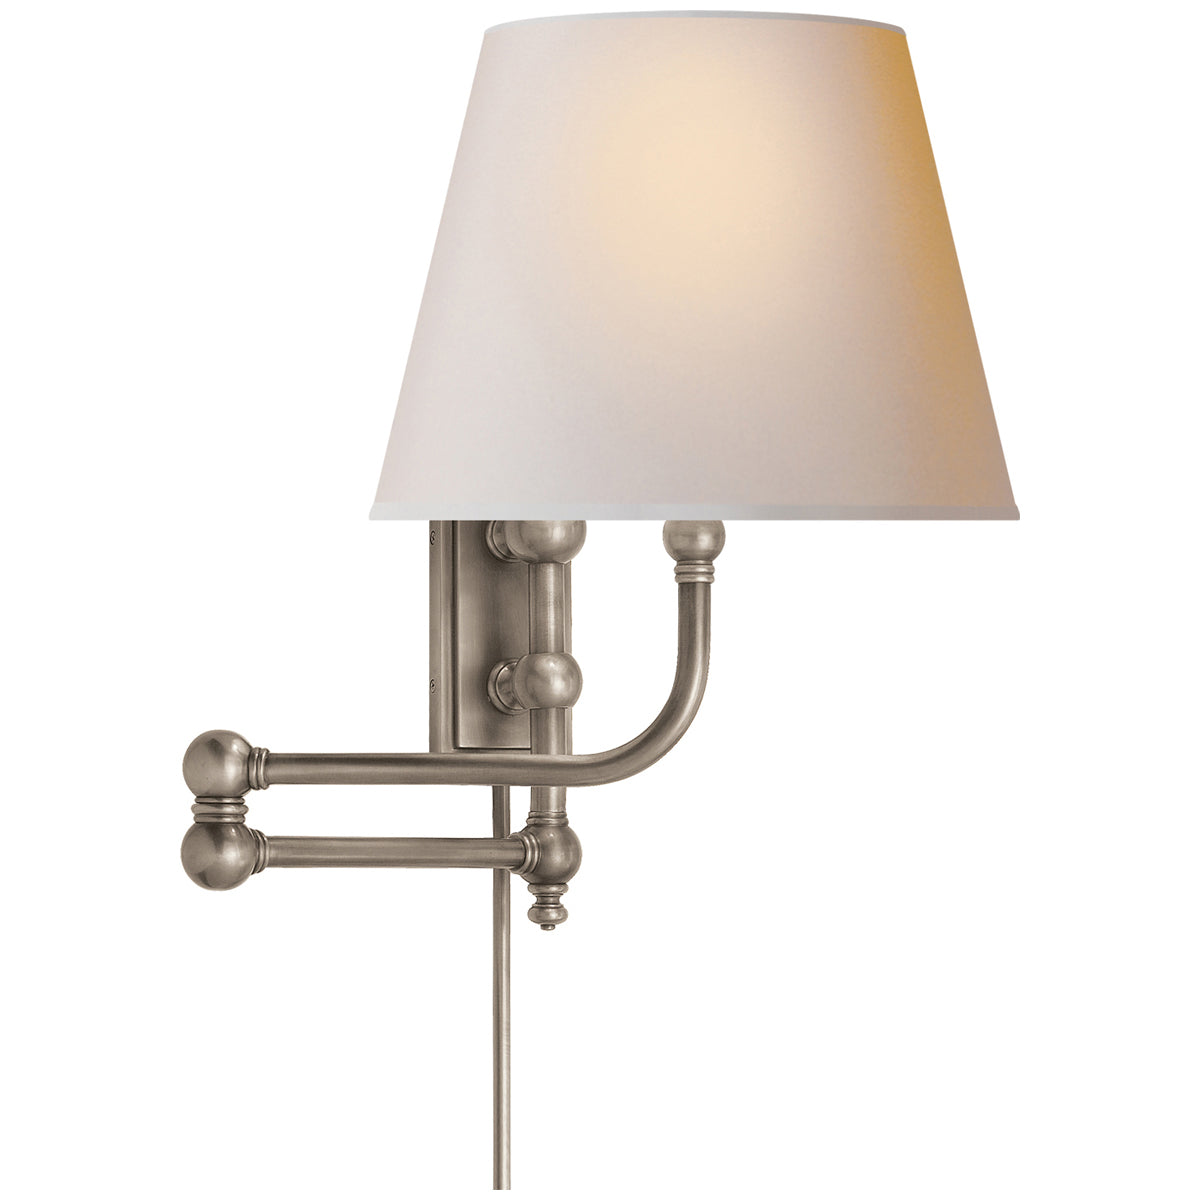 Visual Comfort Pimlico Swing Arm Sconce with Natural Paper Shade